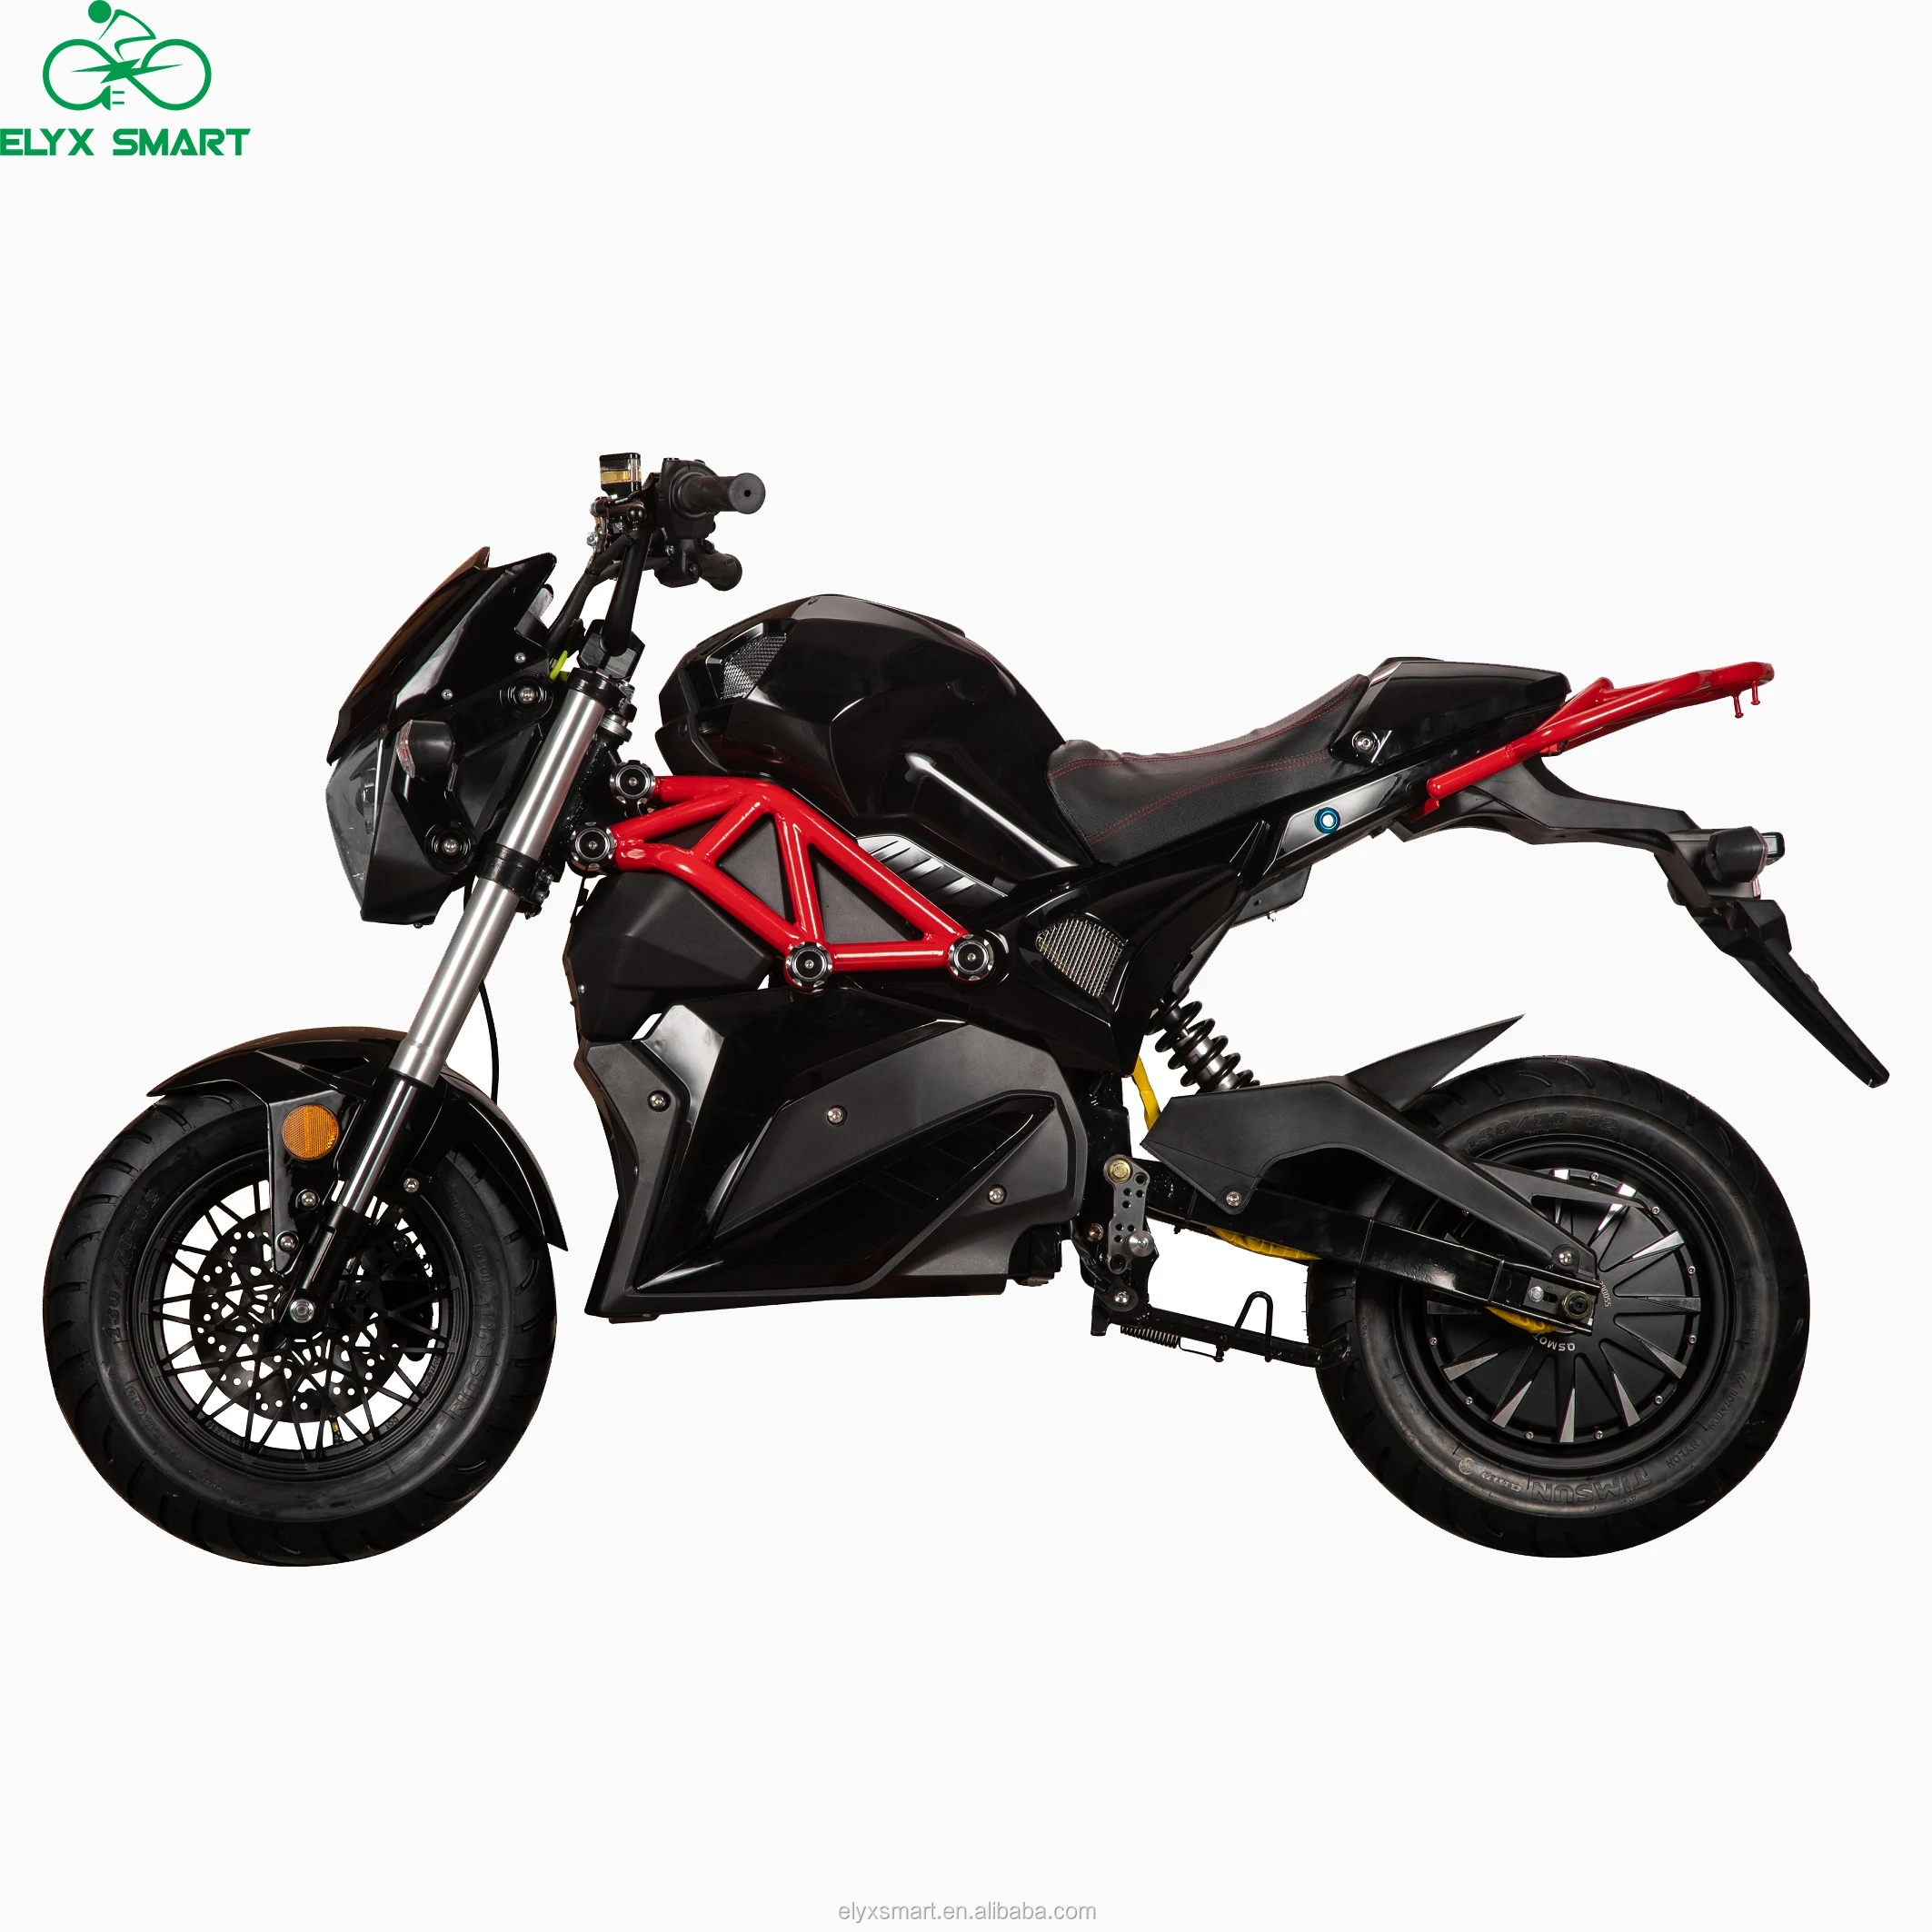 Elyx Monster S 72V 3000w Pit Bike Off Road COC Super Cub Lithium Battery 80KM/H Racing Motorcycle Electric Motorcycle